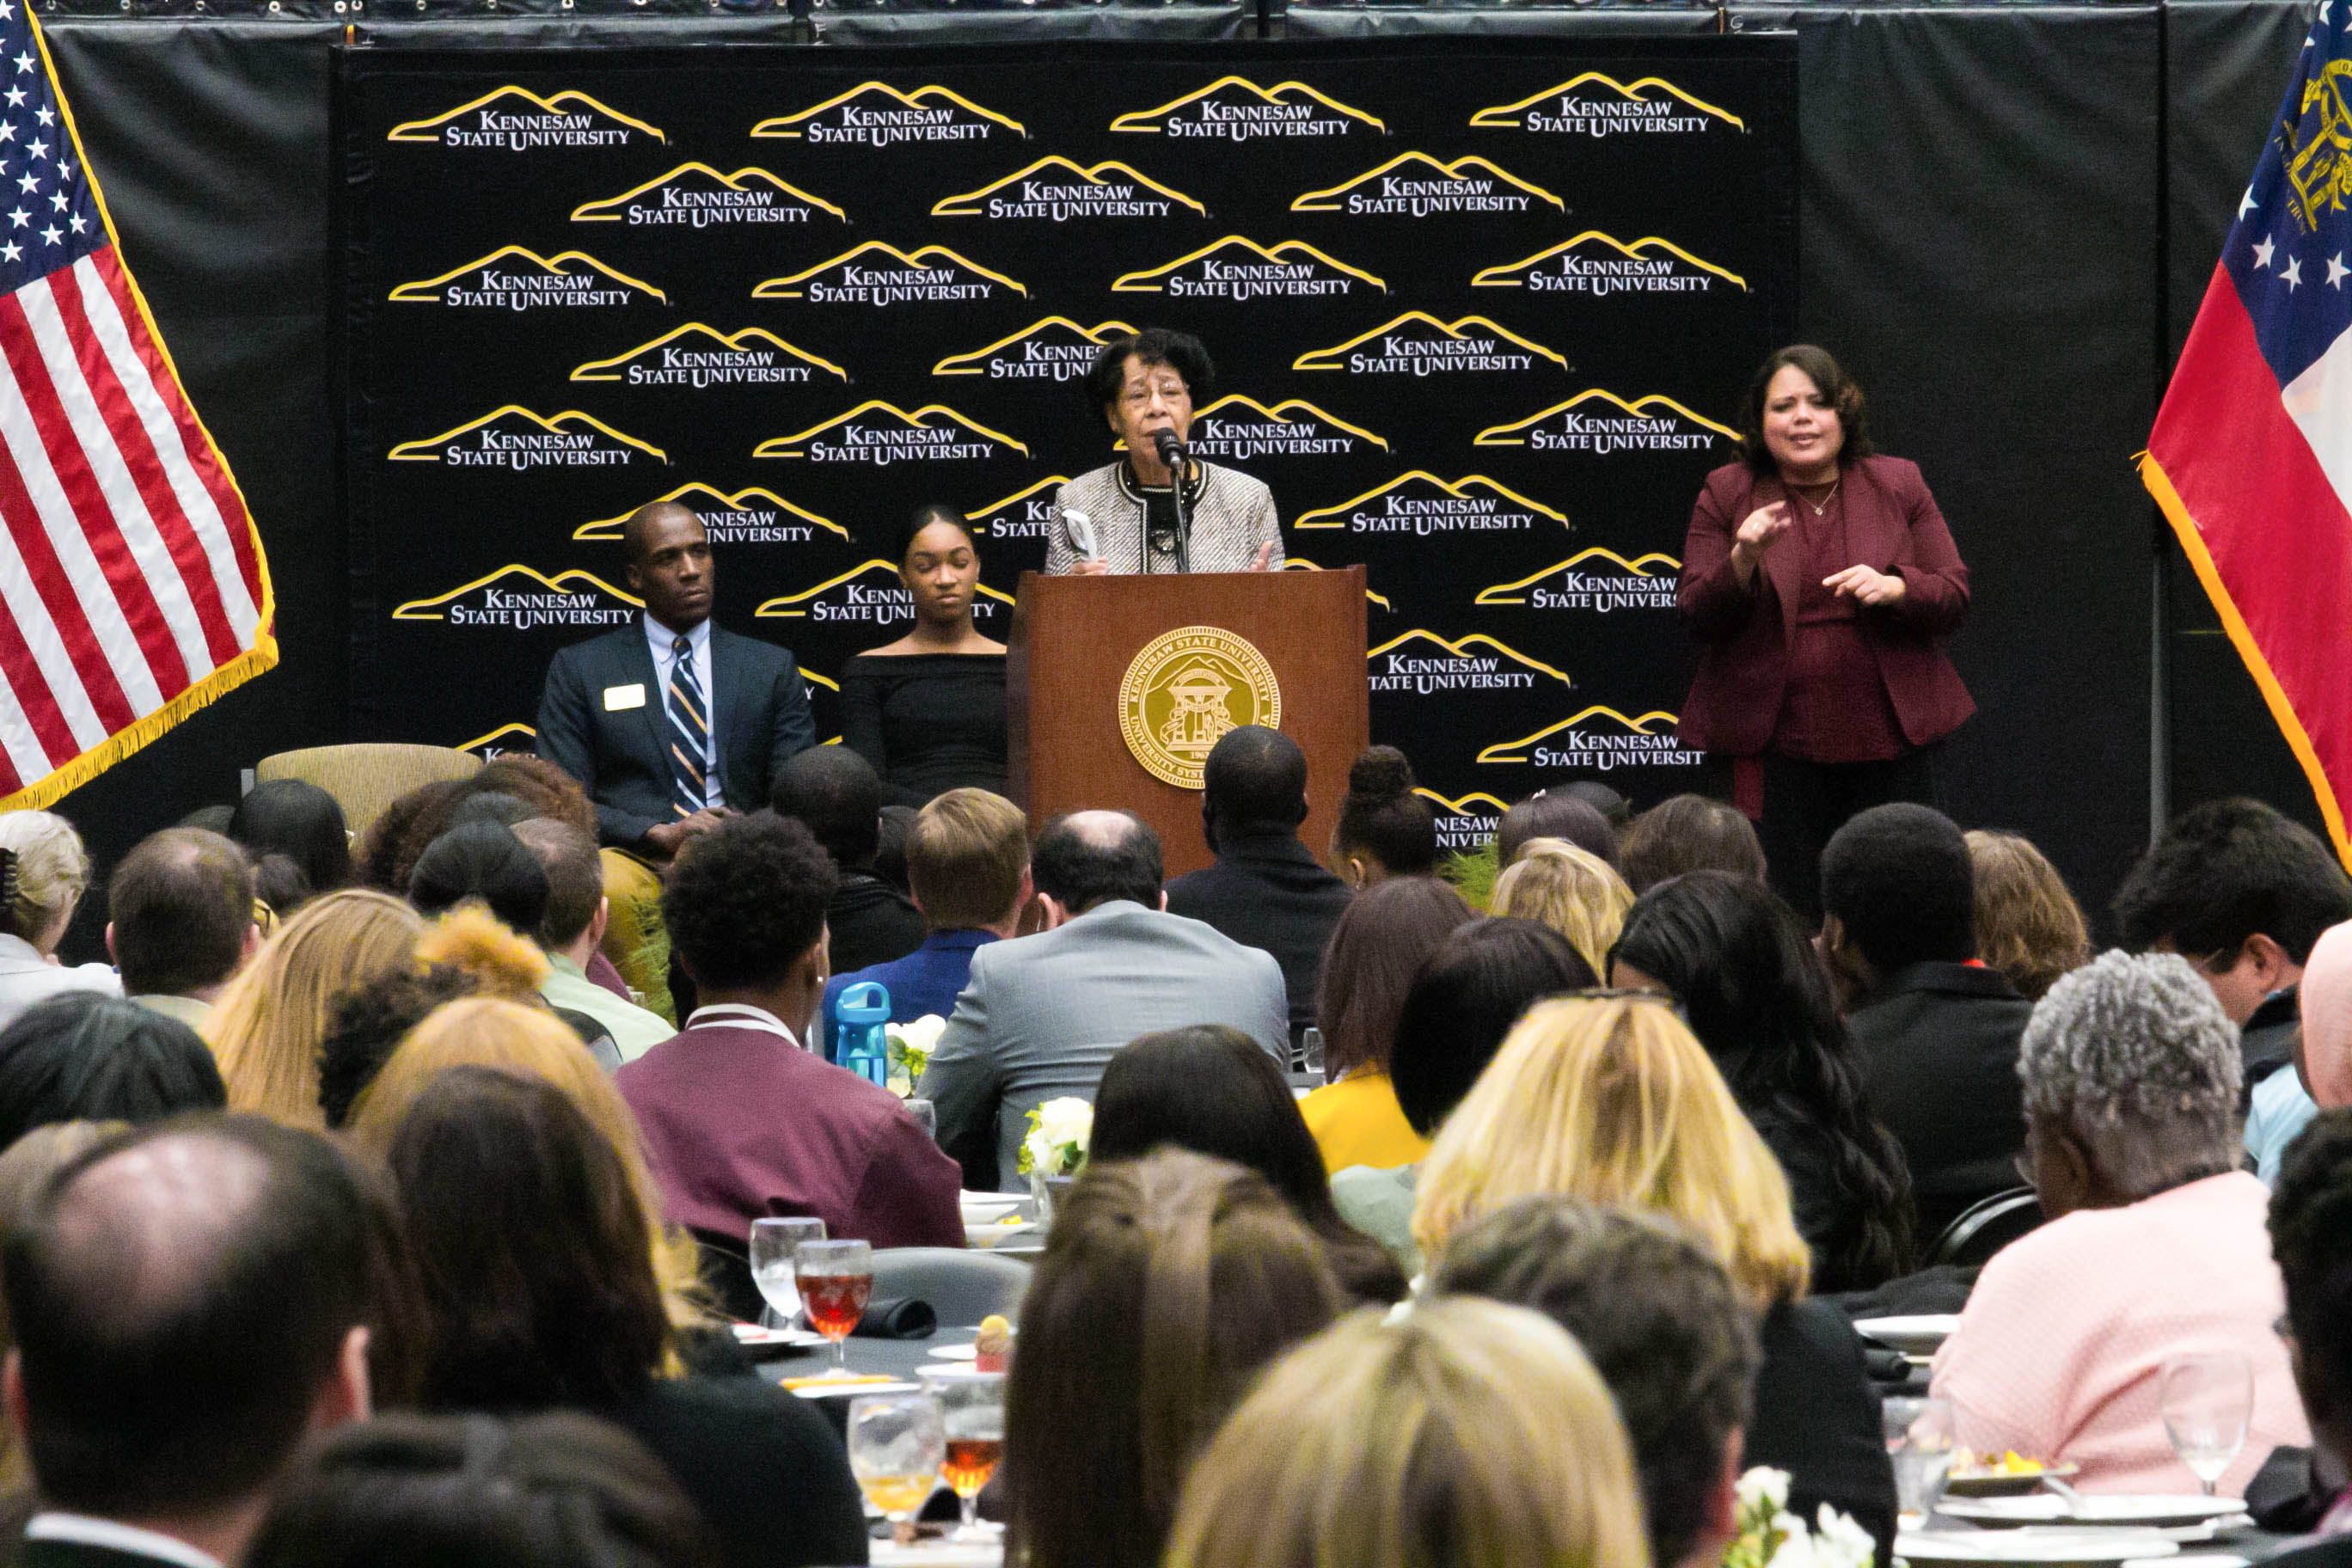 Mary Frances Early honors legacy of Martin Luther King Jr. in keynote address